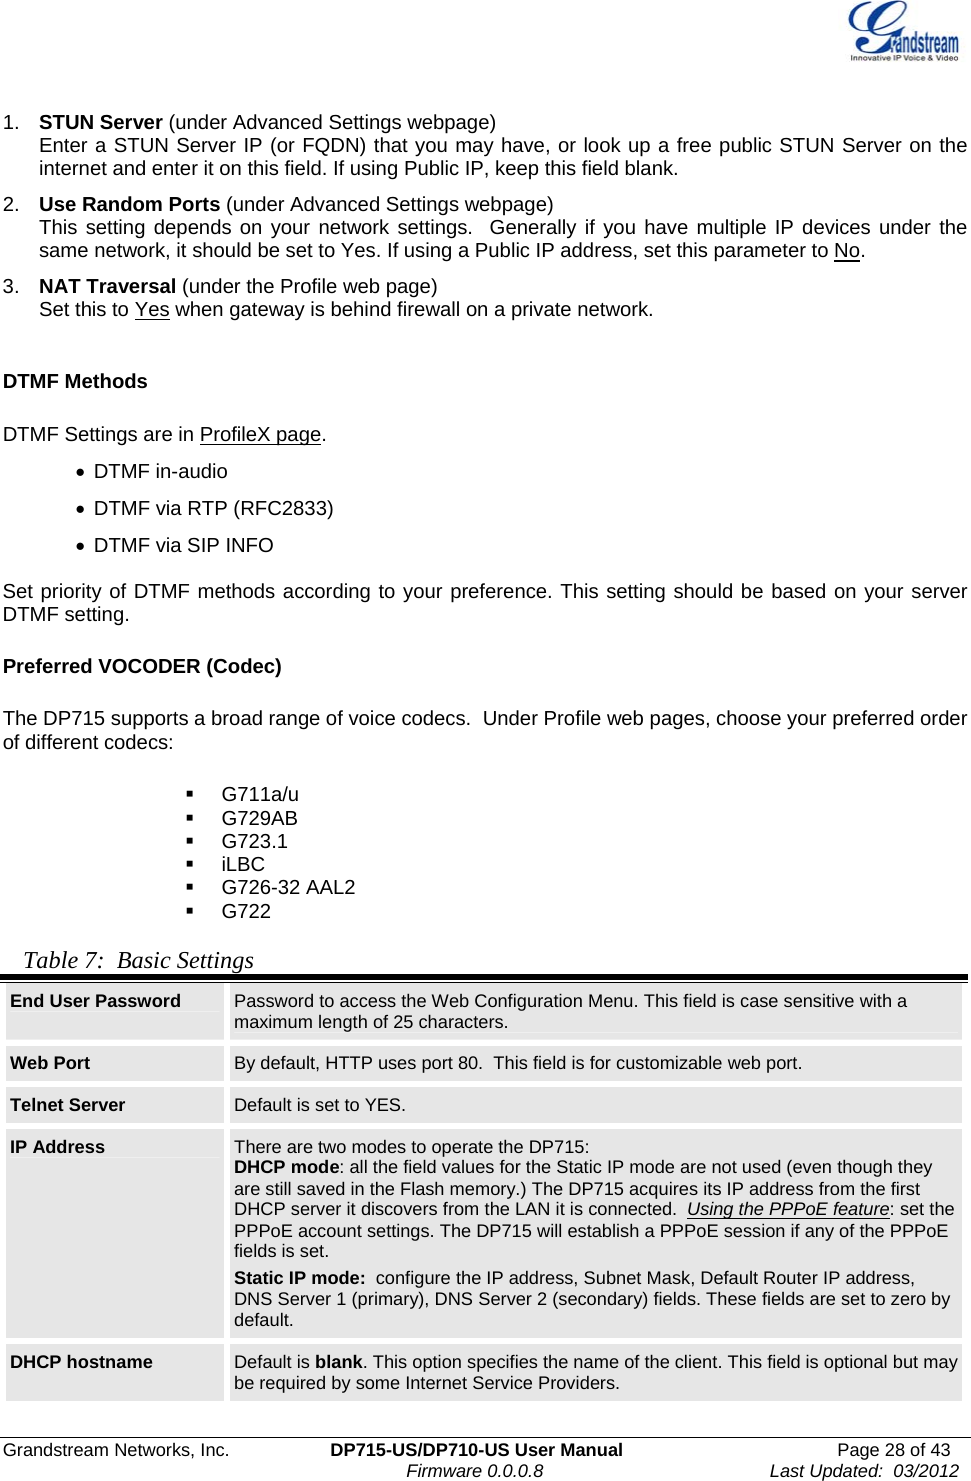  Grandstream Networks, Inc.  DP715-US/DP710-US User Manual  Page 28 of 43                                                                               Firmware 0.0.0.8                                     Last Updated:  03/2012 1.  STUN Server (under Advanced Settings webpage) Enter a STUN Server IP (or FQDN) that you may have, or look up a free public STUN Server on the internet and enter it on this field. If using Public IP, keep this field blank. 2.  Use Random Ports (under Advanced Settings webpage) This setting depends on your network settings.  Generally if you have multiple IP devices under the same network, it should be set to Yes. If using a Public IP address, set this parameter to No. 3.  NAT Traversal (under the Profile web page) Set this to Yes when gateway is behind firewall on a private network.   DTMF Methods  DTMF Settings are in ProfileX page. • DTMF in-audio •  DTMF via RTP (RFC2833) •  DTMF via SIP INFO  Set priority of DTMF methods according to your preference. This setting should be based on your server DTMF setting.  Preferred VOCODER (Codec)  The DP715 supports a broad range of voice codecs.  Under Profile web pages, choose your preferred order of different codecs:     G711a/u  G729AB   G723.1  iLBC  G726-32 AAL2  G722  Table 7:  Basic Settings End User Password  Password to access the Web Configuration Menu. This field is case sensitive with a maximum length of 25 characters. Web Port  By default, HTTP uses port 80.  This field is for customizable web port. Telnet Server  Default is set to YES. IP Address  There are two modes to operate the DP715: DHCP mode: all the field values for the Static IP mode are not used (even though they are still saved in the Flash memory.) The DP715 acquires its IP address from the first DHCP server it discovers from the LAN it is connected.  Using the PPPoE feature: set the PPPoE account settings. The DP715 will establish a PPPoE session if any of the PPPoE fields is set. Static IP mode:  configure the IP address, Subnet Mask, Default Router IP address, DNS Server 1 (primary), DNS Server 2 (secondary) fields. These fields are set to zero by default. DHCP hostname  Default is blank. This option specifies the name of the client. This field is optional but may be required by some Internet Service Providers.  